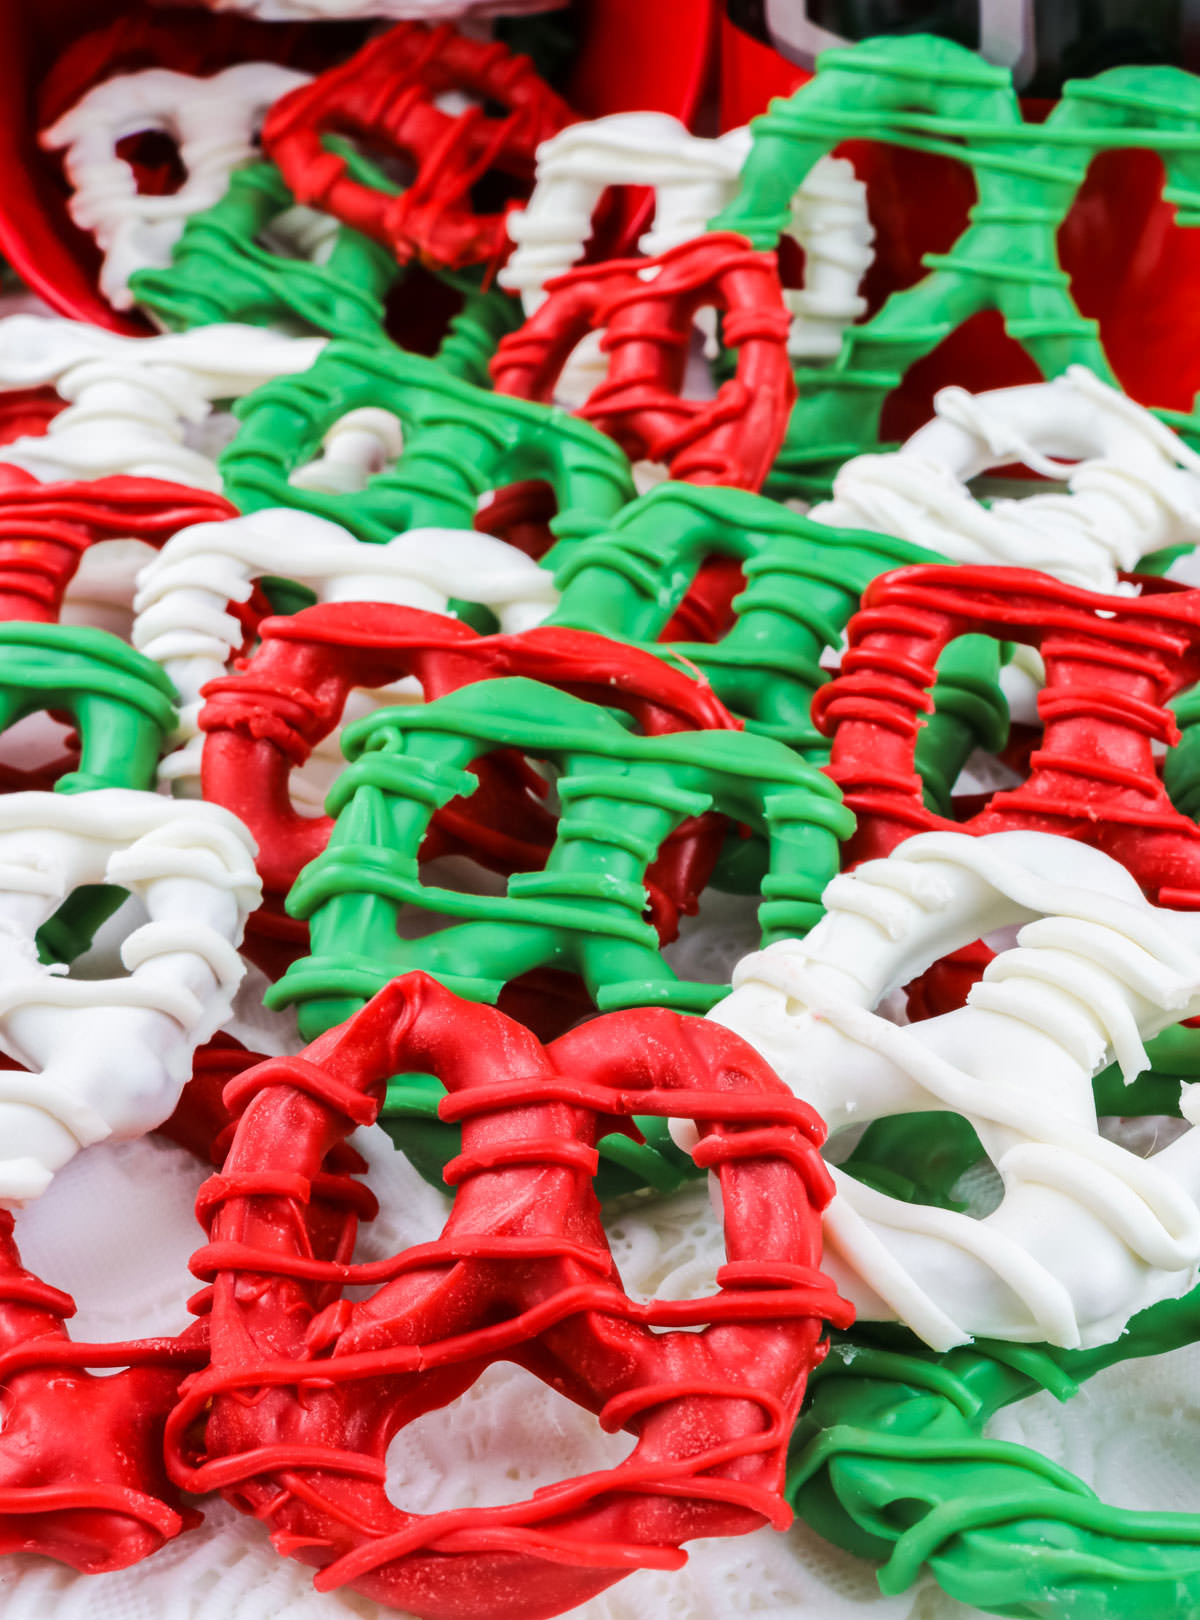 A batch of Christmas Pretzels spilled out on a white surface.